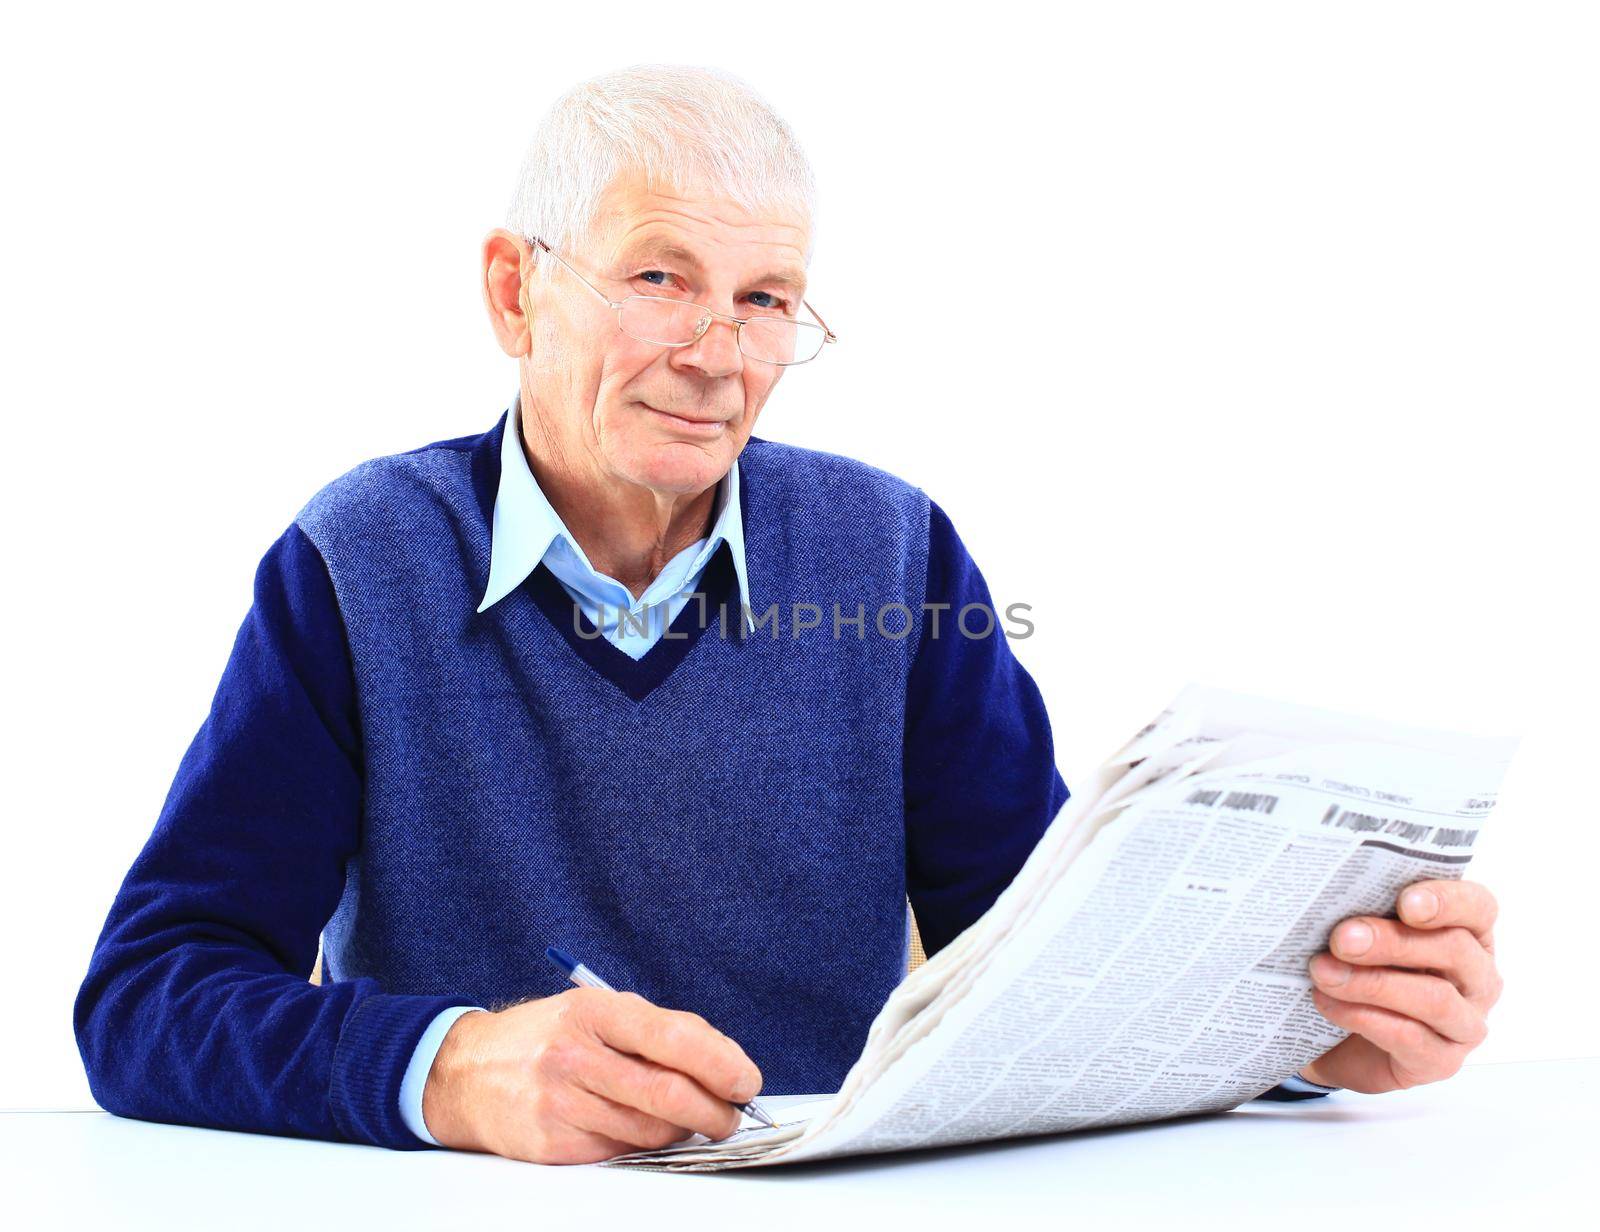 Portrait of an old man solving crosswords in the newspaper by tsyhun